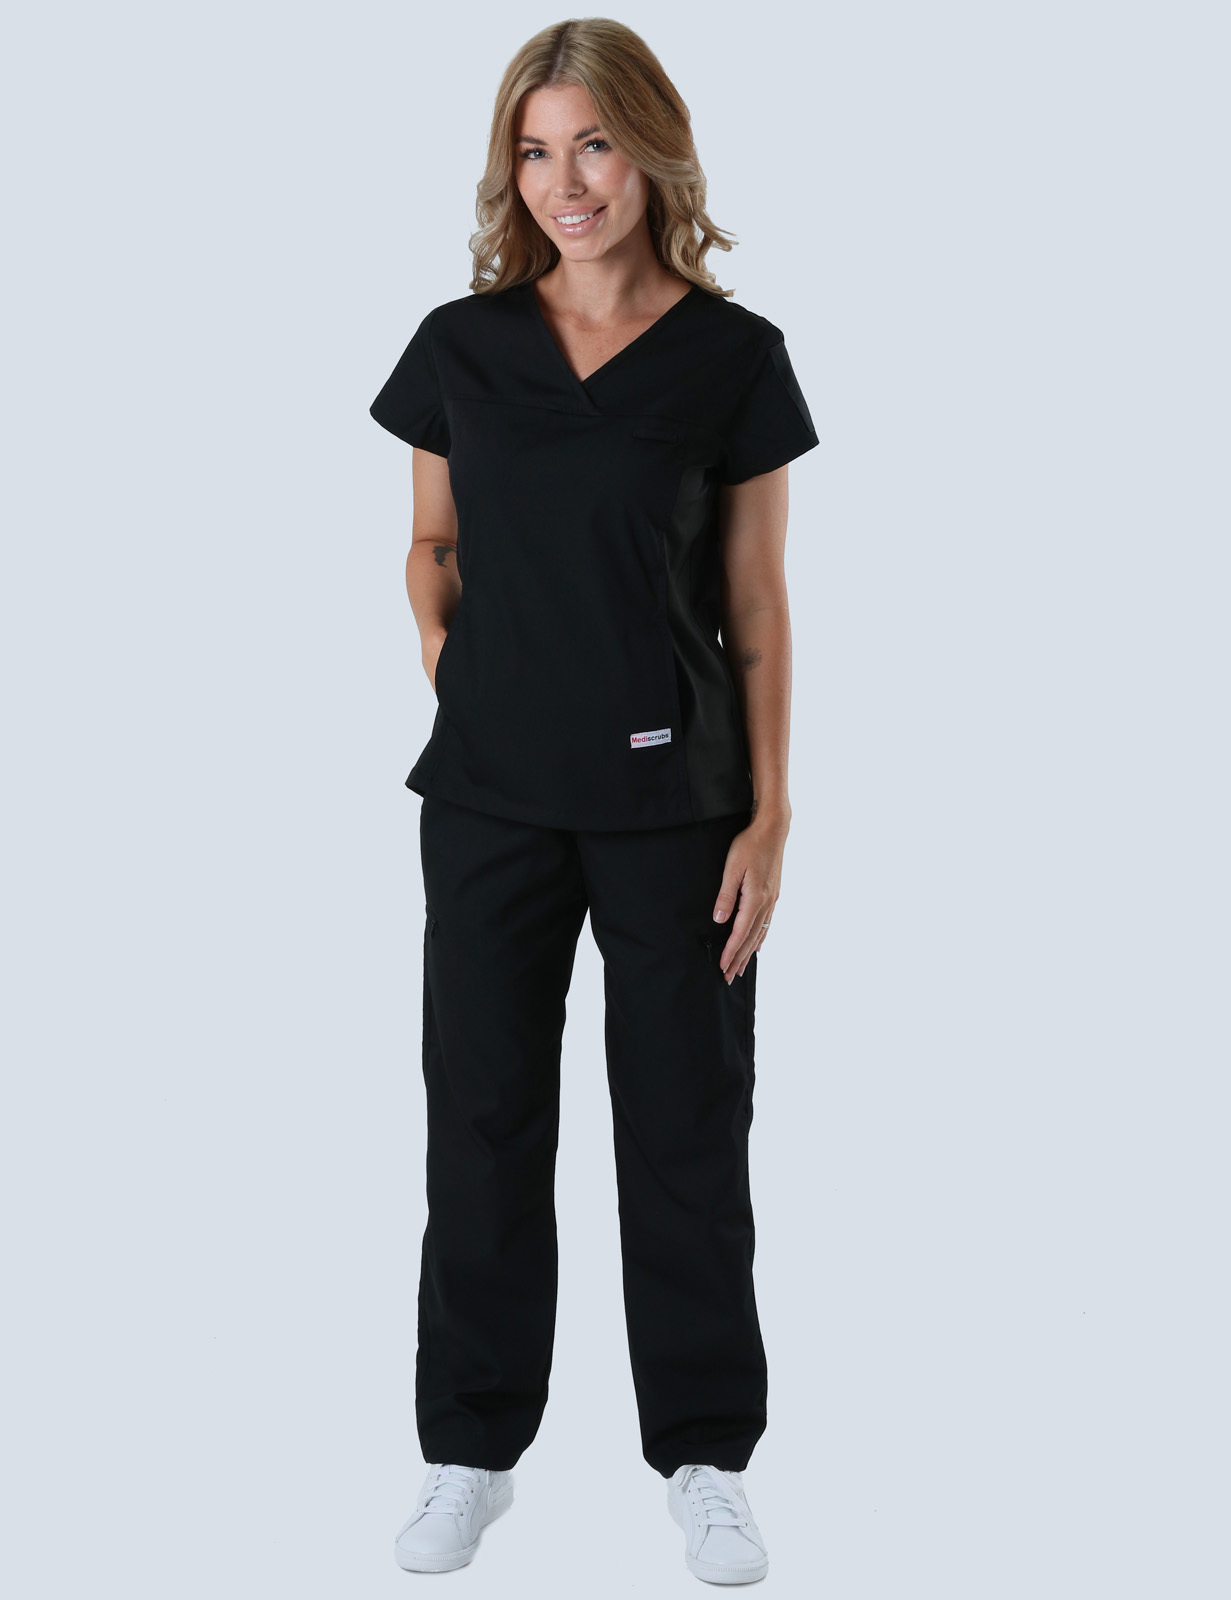 Women's Fit Solid Scrub Top With Spandex Panel - Black - X Small